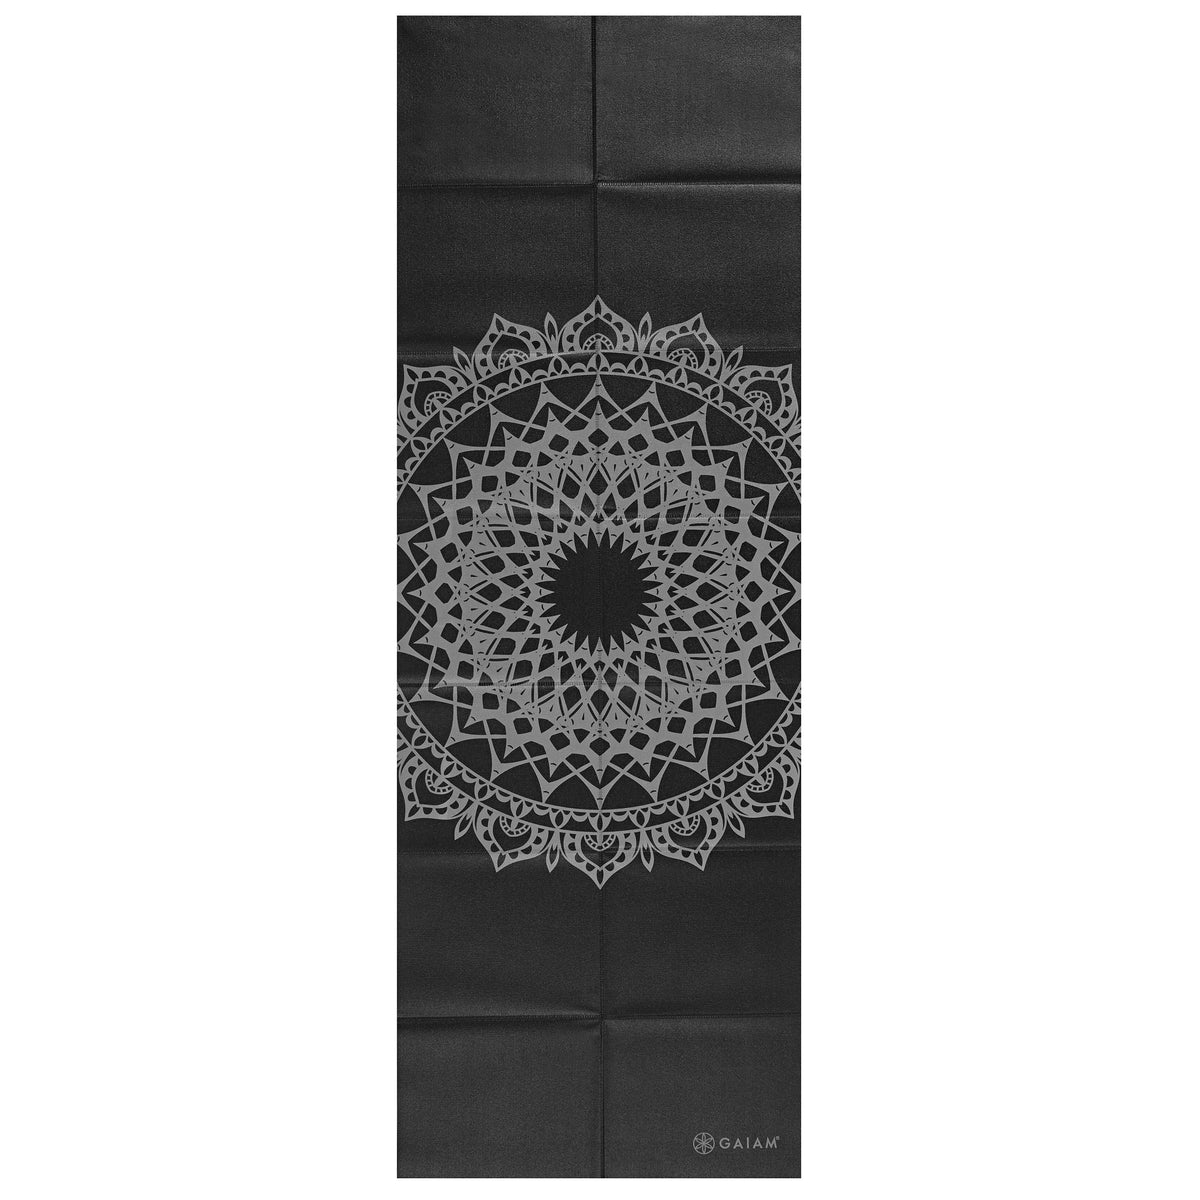 Gaiam Yoga Mat Folding Travel Fitness & Exercise Mat  Foldable Yoga Mat  for All Types of Yoga, Pilates & Floor Workouts, Icy Paisley, 2mm, Mats -   Canada